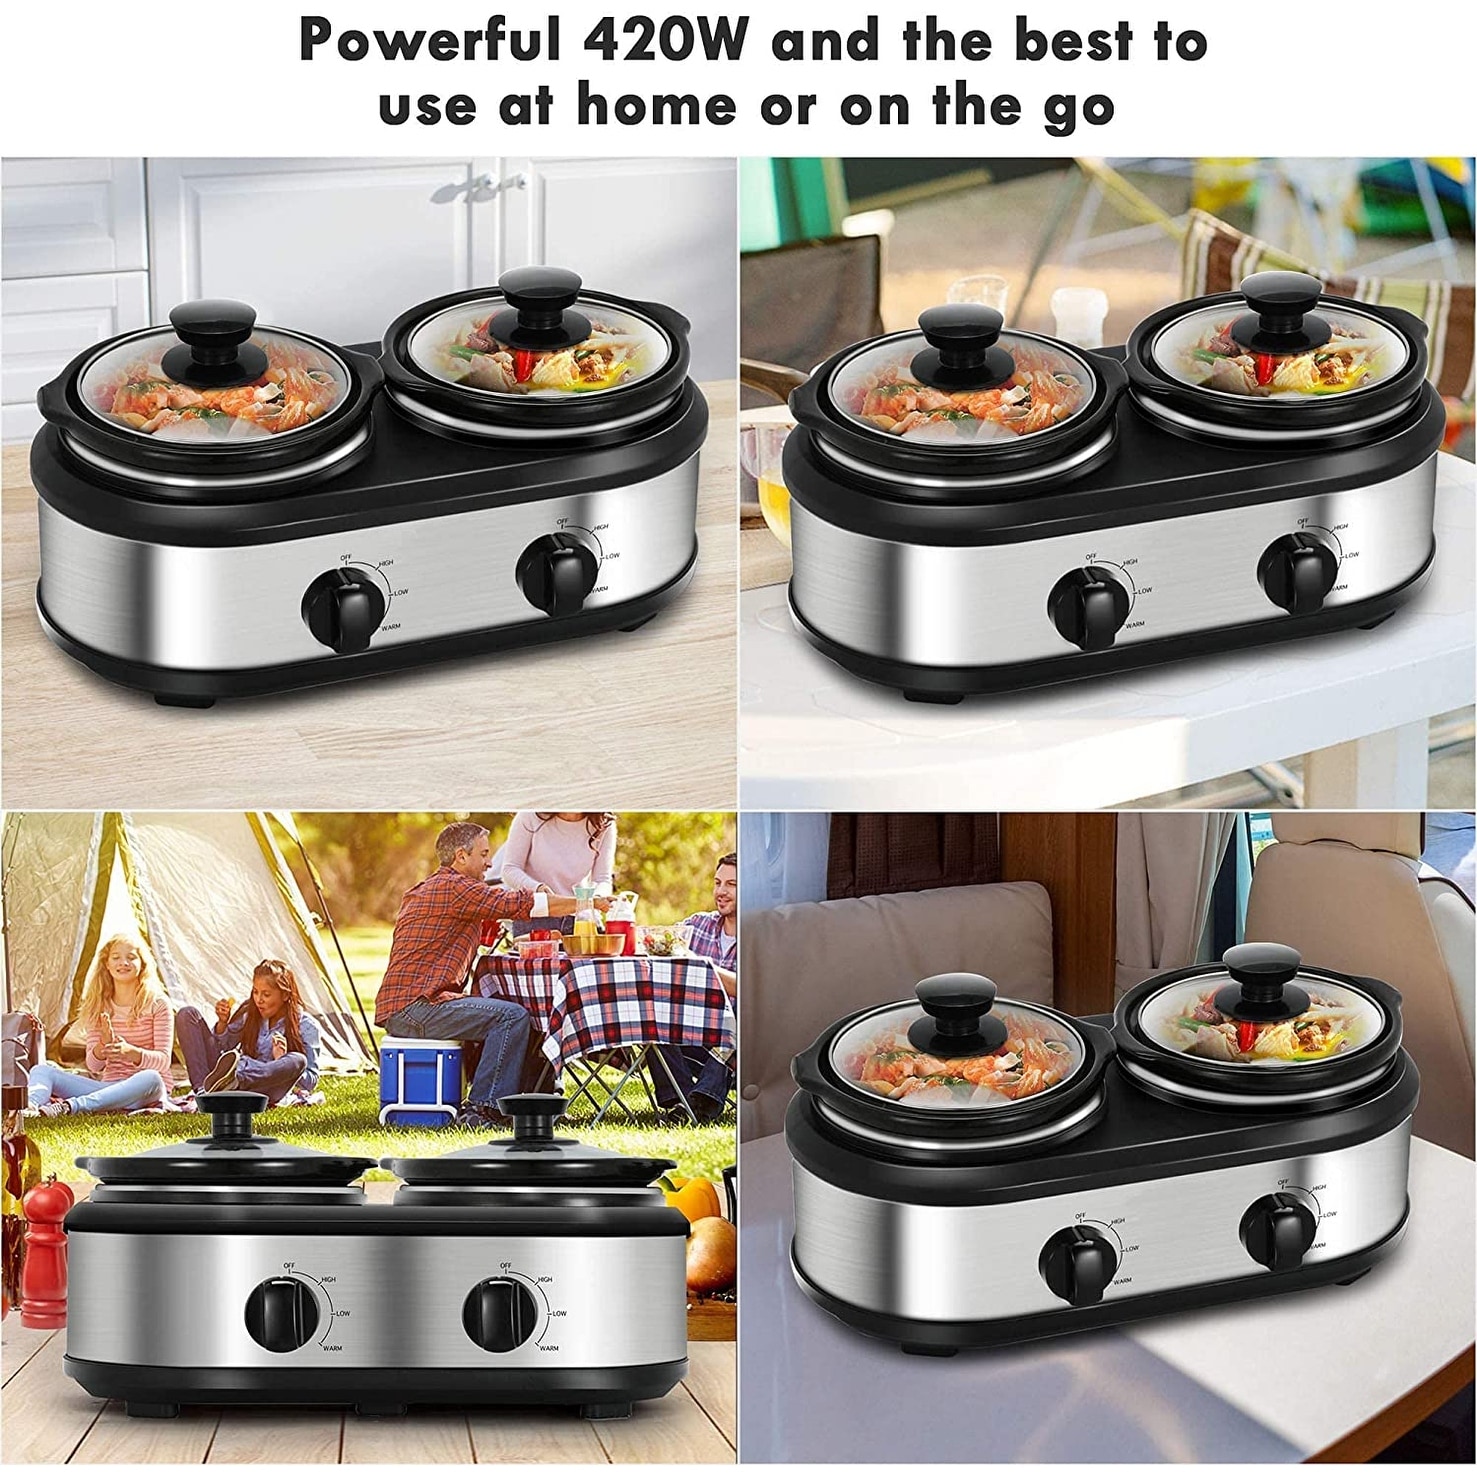 Slow Cooker, Dual and Triple Slow Cooker Buffet Server Multiple Pot Food  Warmer - Bed Bath & Beyond - 37532100